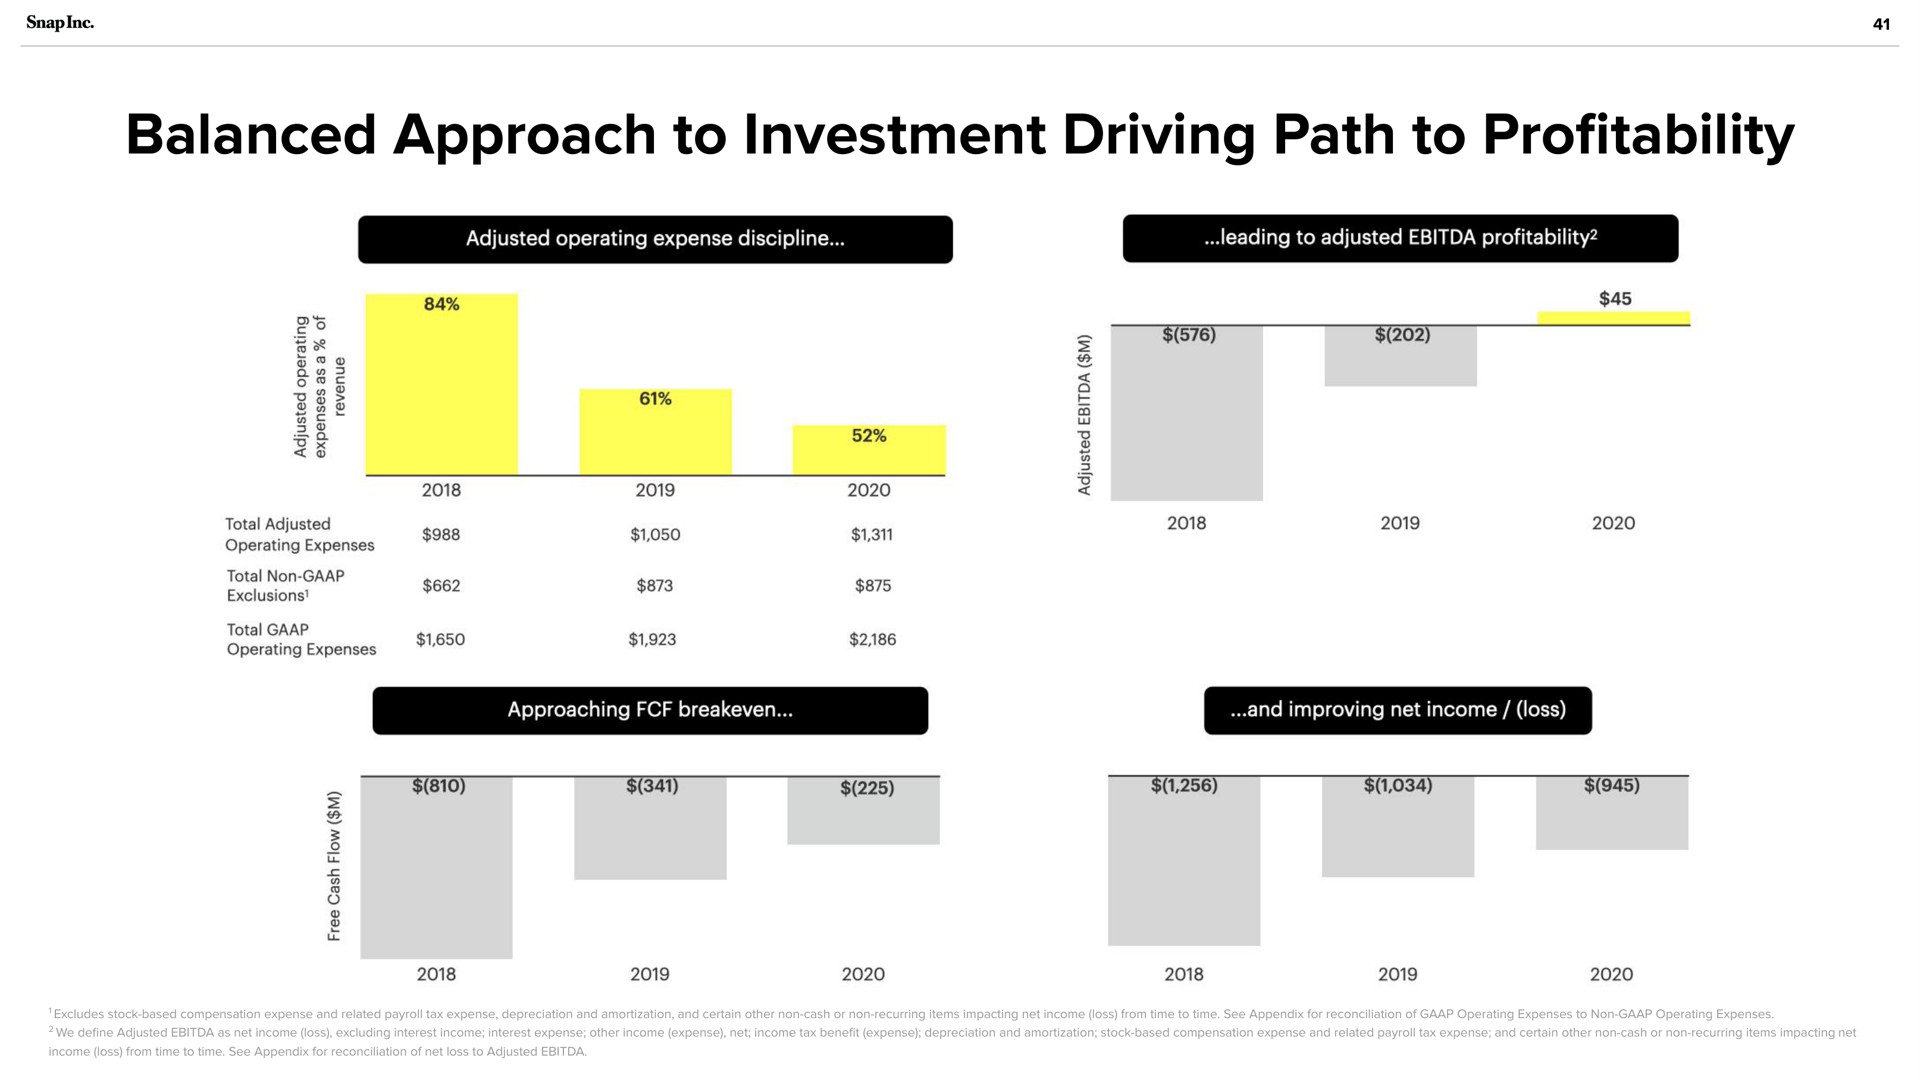 balanced approach to investment driving path to profitability | Snap Inc